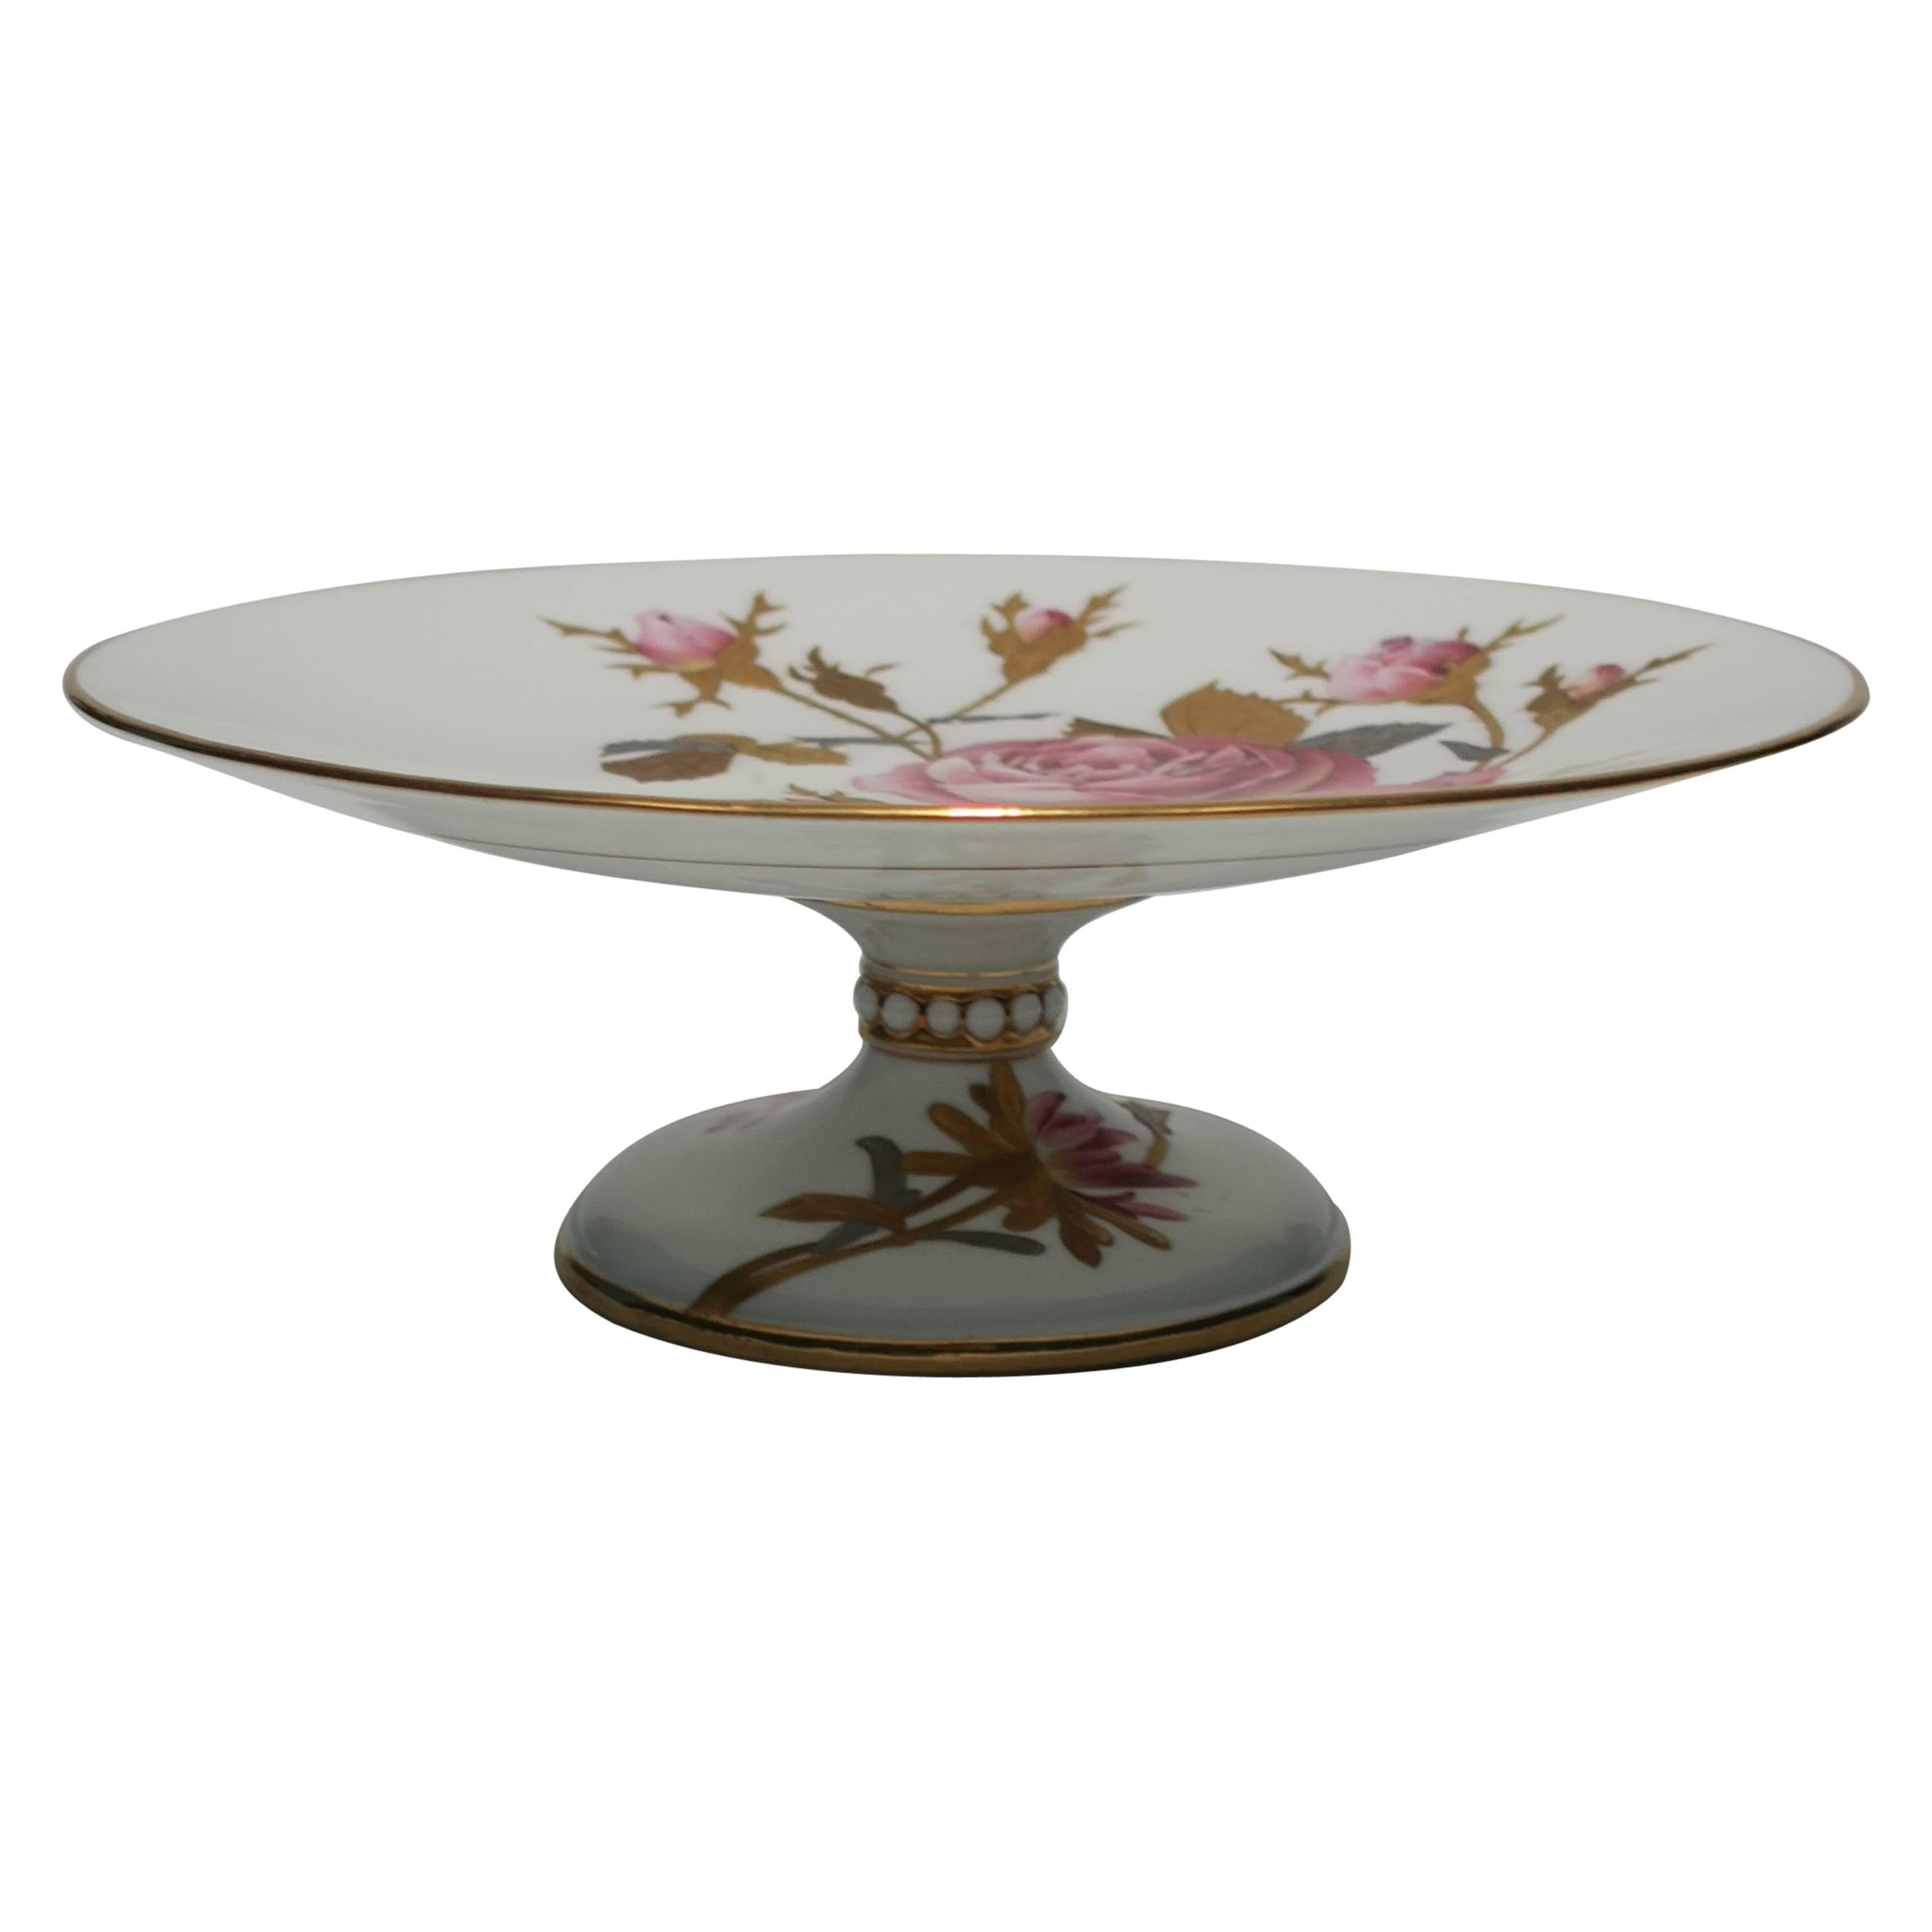 European White Porcelain Pedestal Dessert Plate with Pink Roses and Gold Leaves For Sale 3